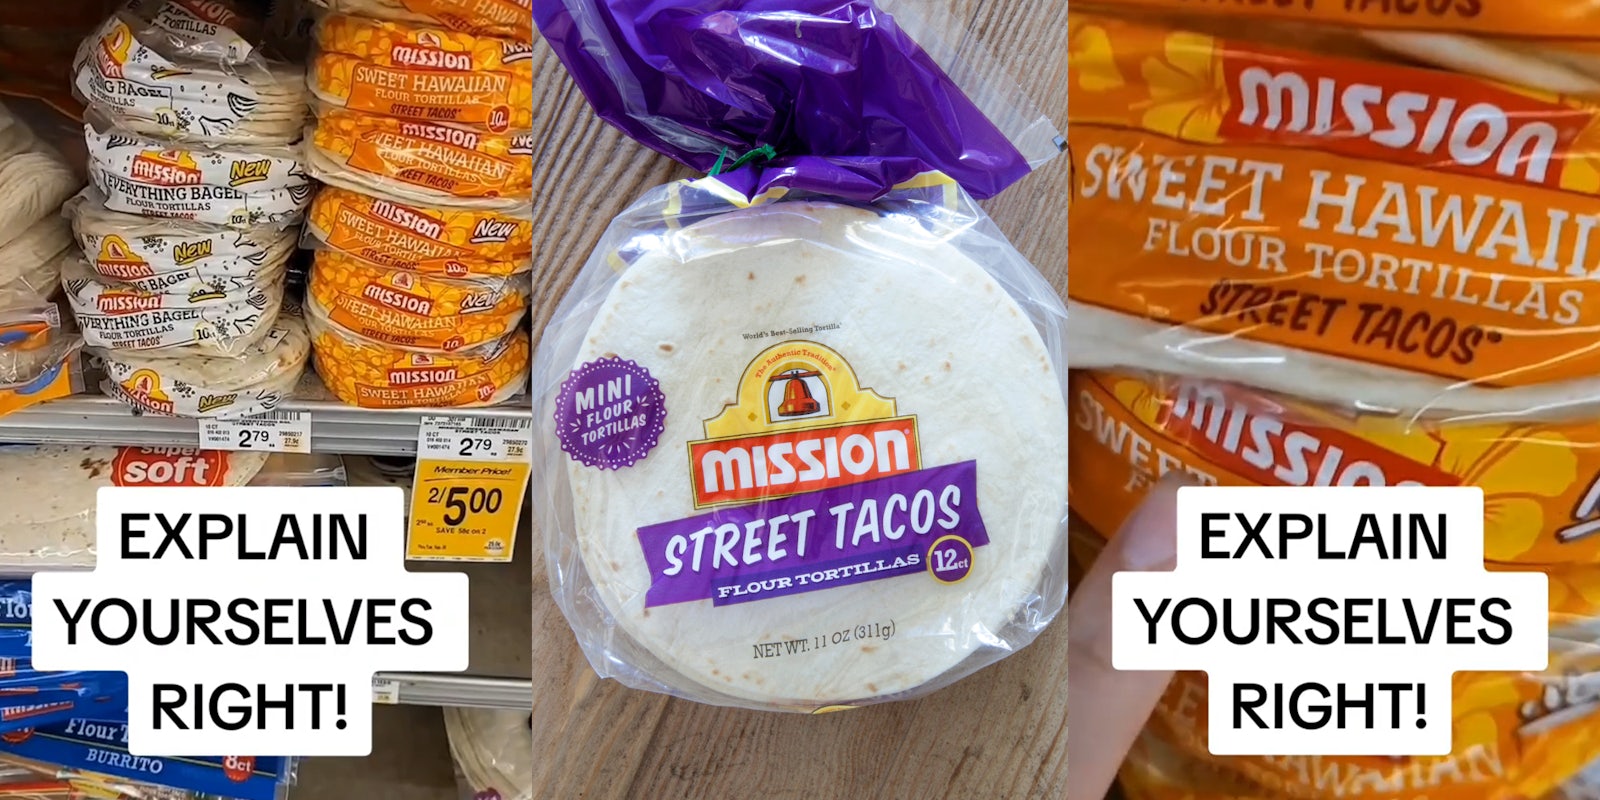 Customer calls out Mission Tortillas for now selling 2 types of flavored tortillas